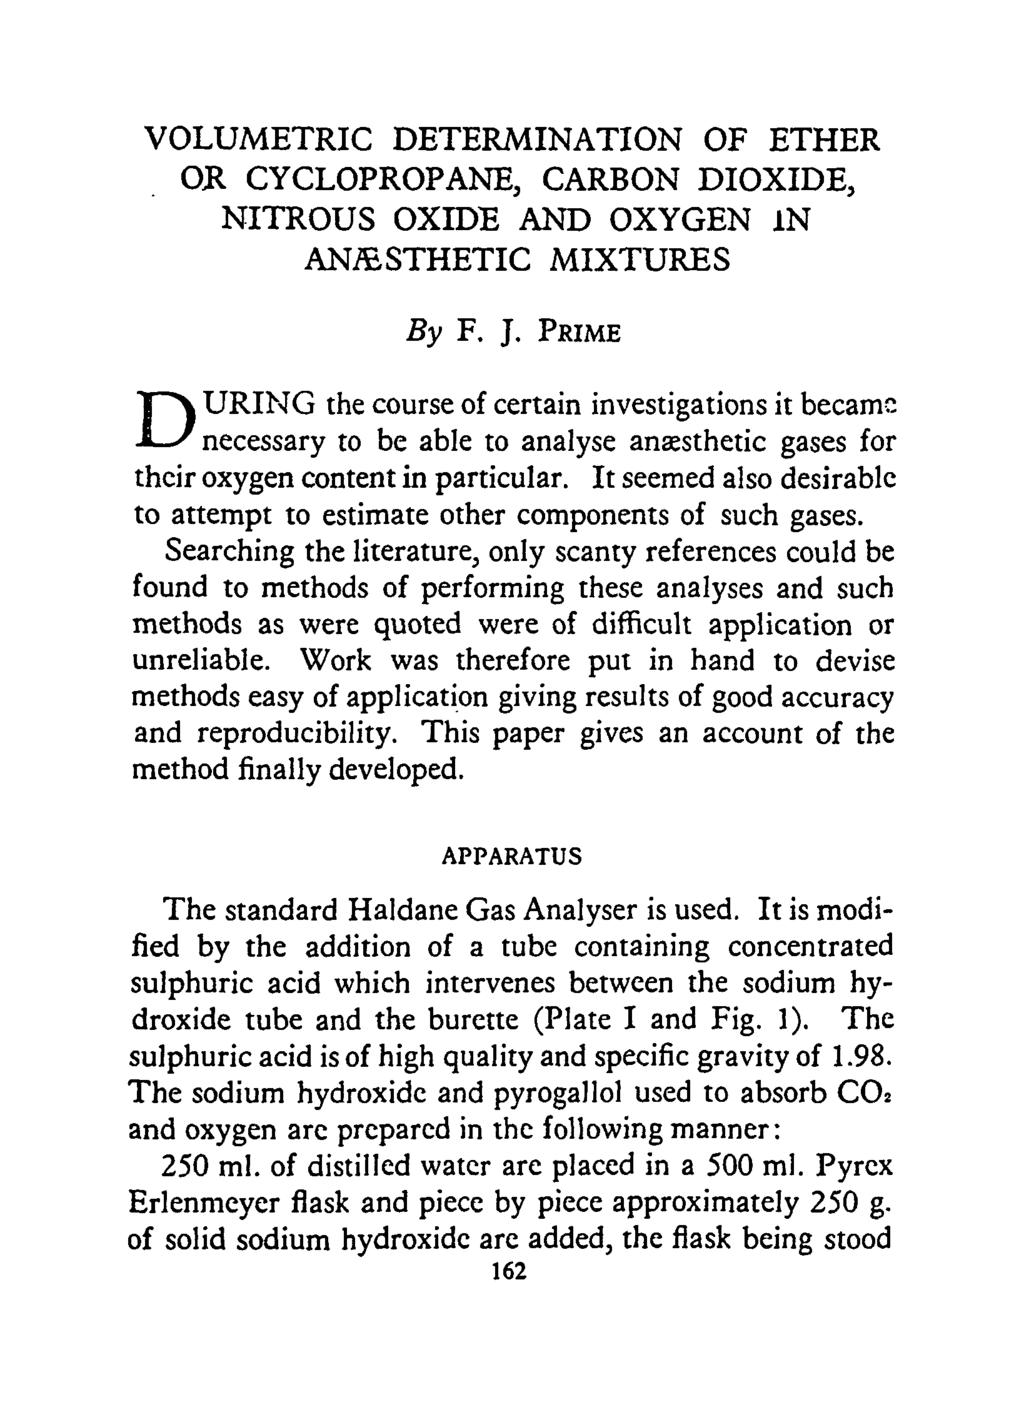 VOLUMETRIC DETERMINATION OF ETHER OR CYCLOPROPANE, CARBON DIOXIDE, NITROUS OXIDE AND OXYGEN IN ANESTHETIC MIXTURES By F. J.